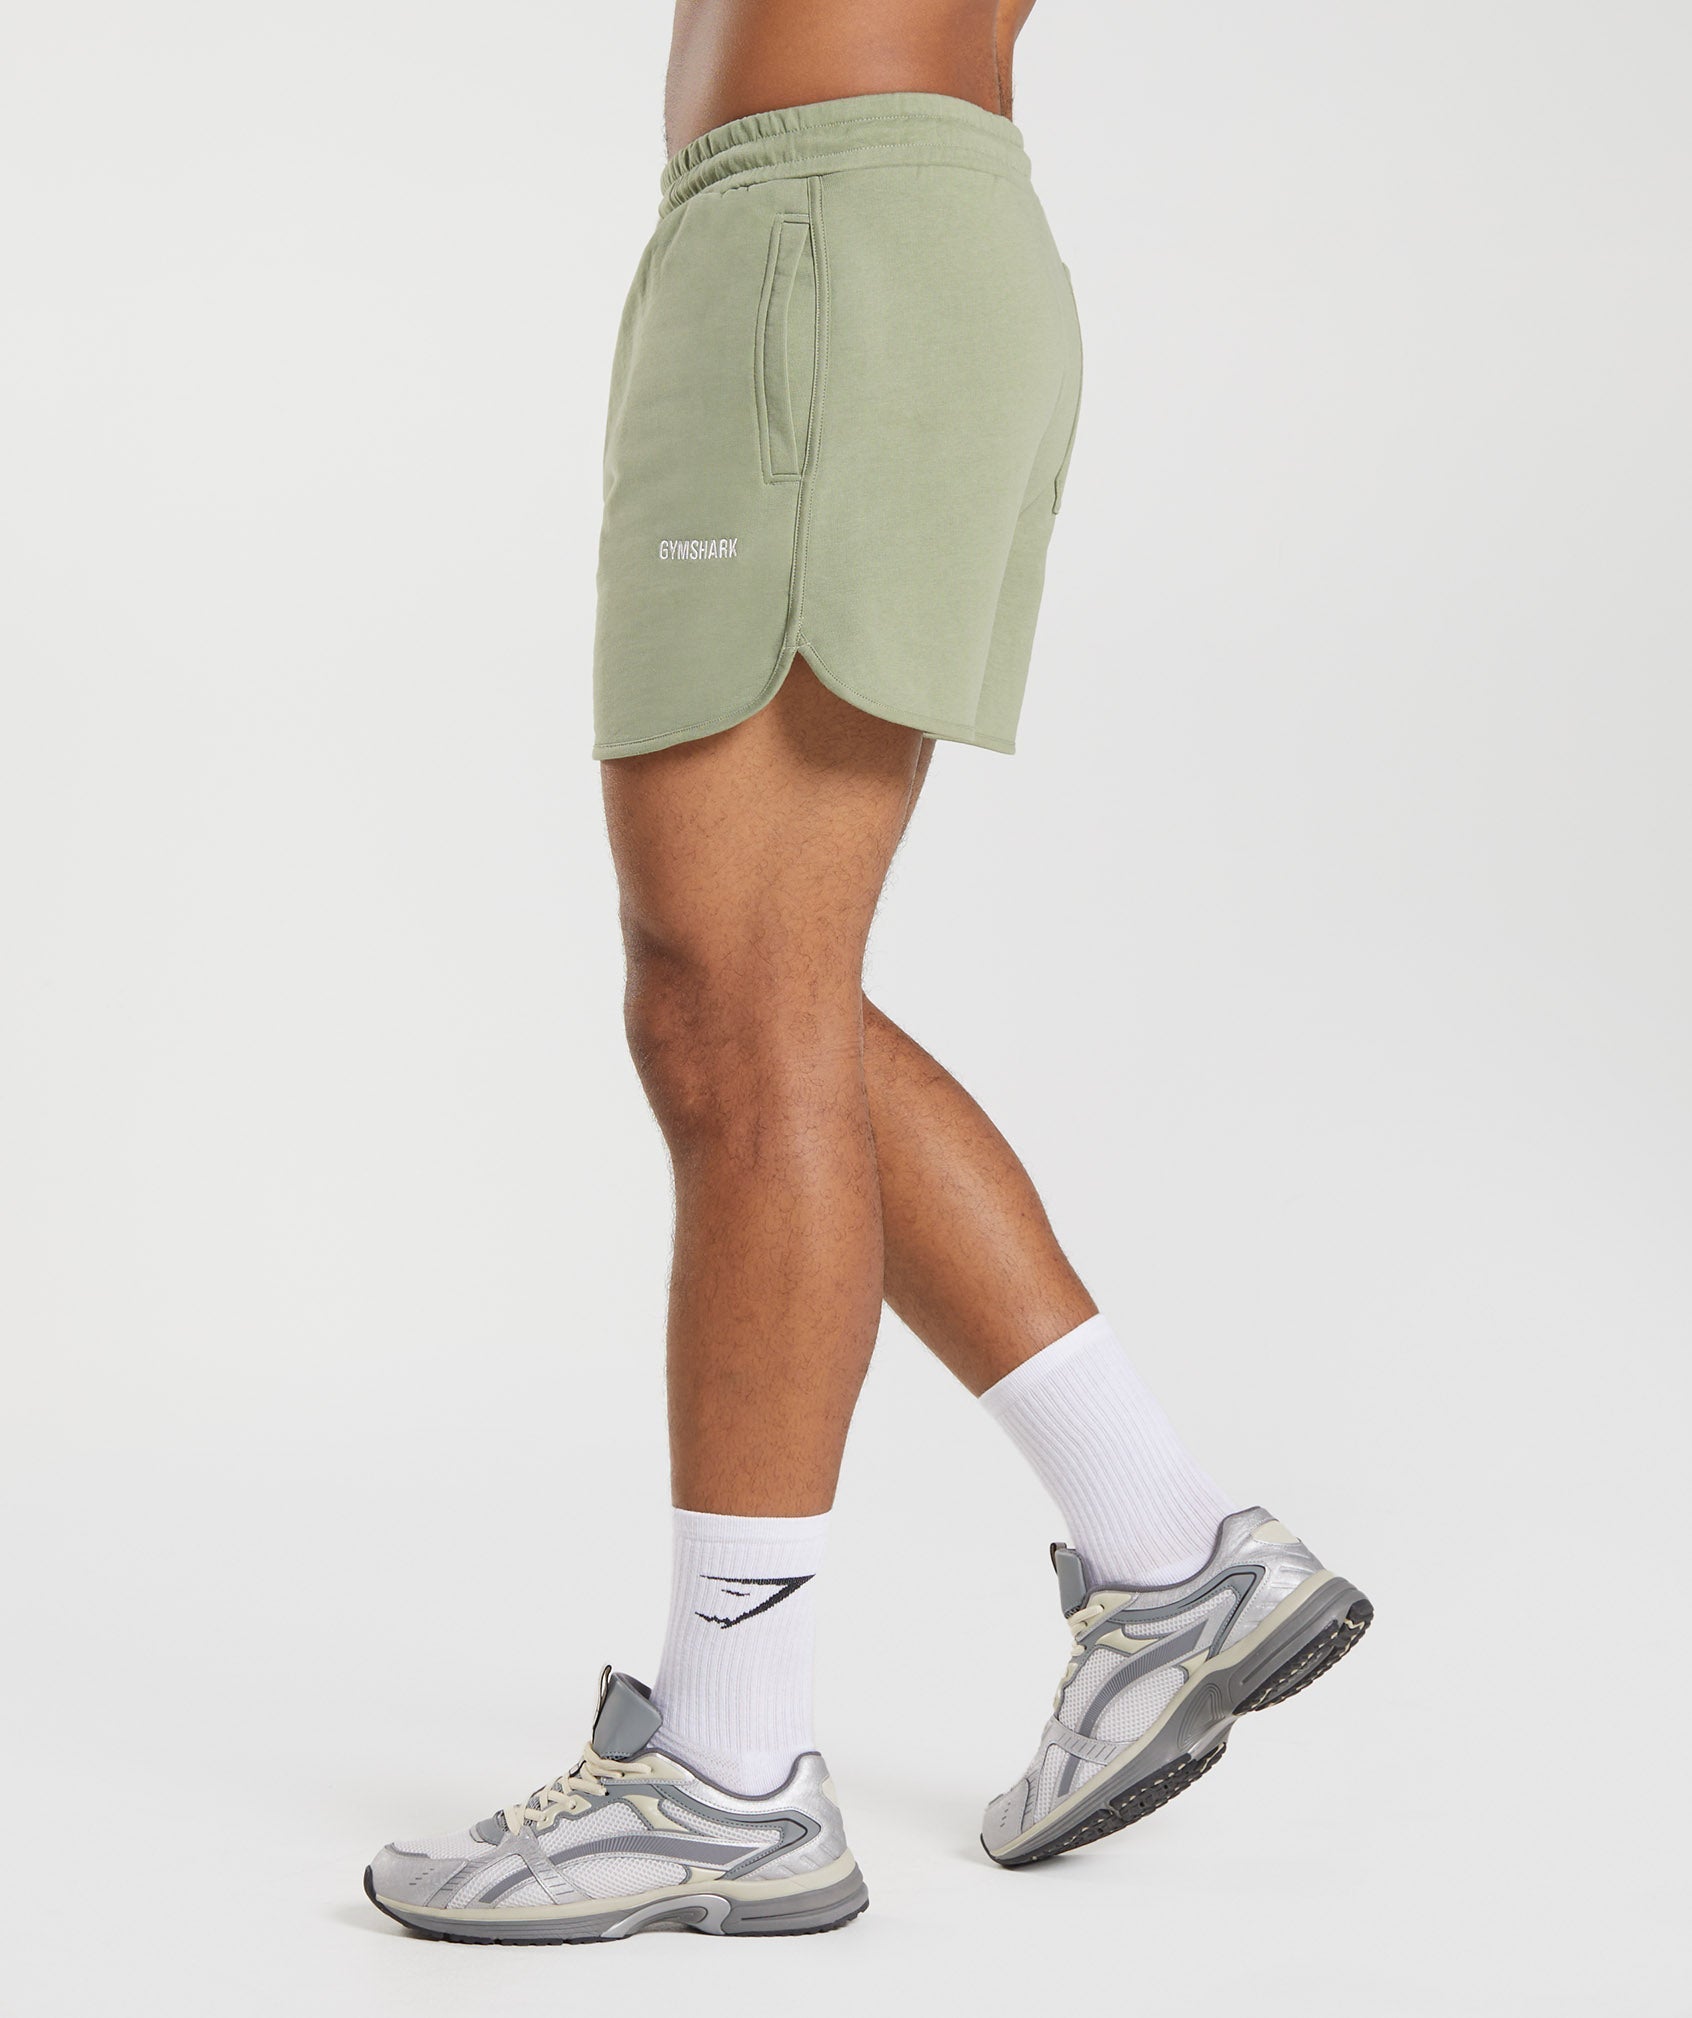 Rest Day Sweats 4'' Lounge Shorts in Sage Green